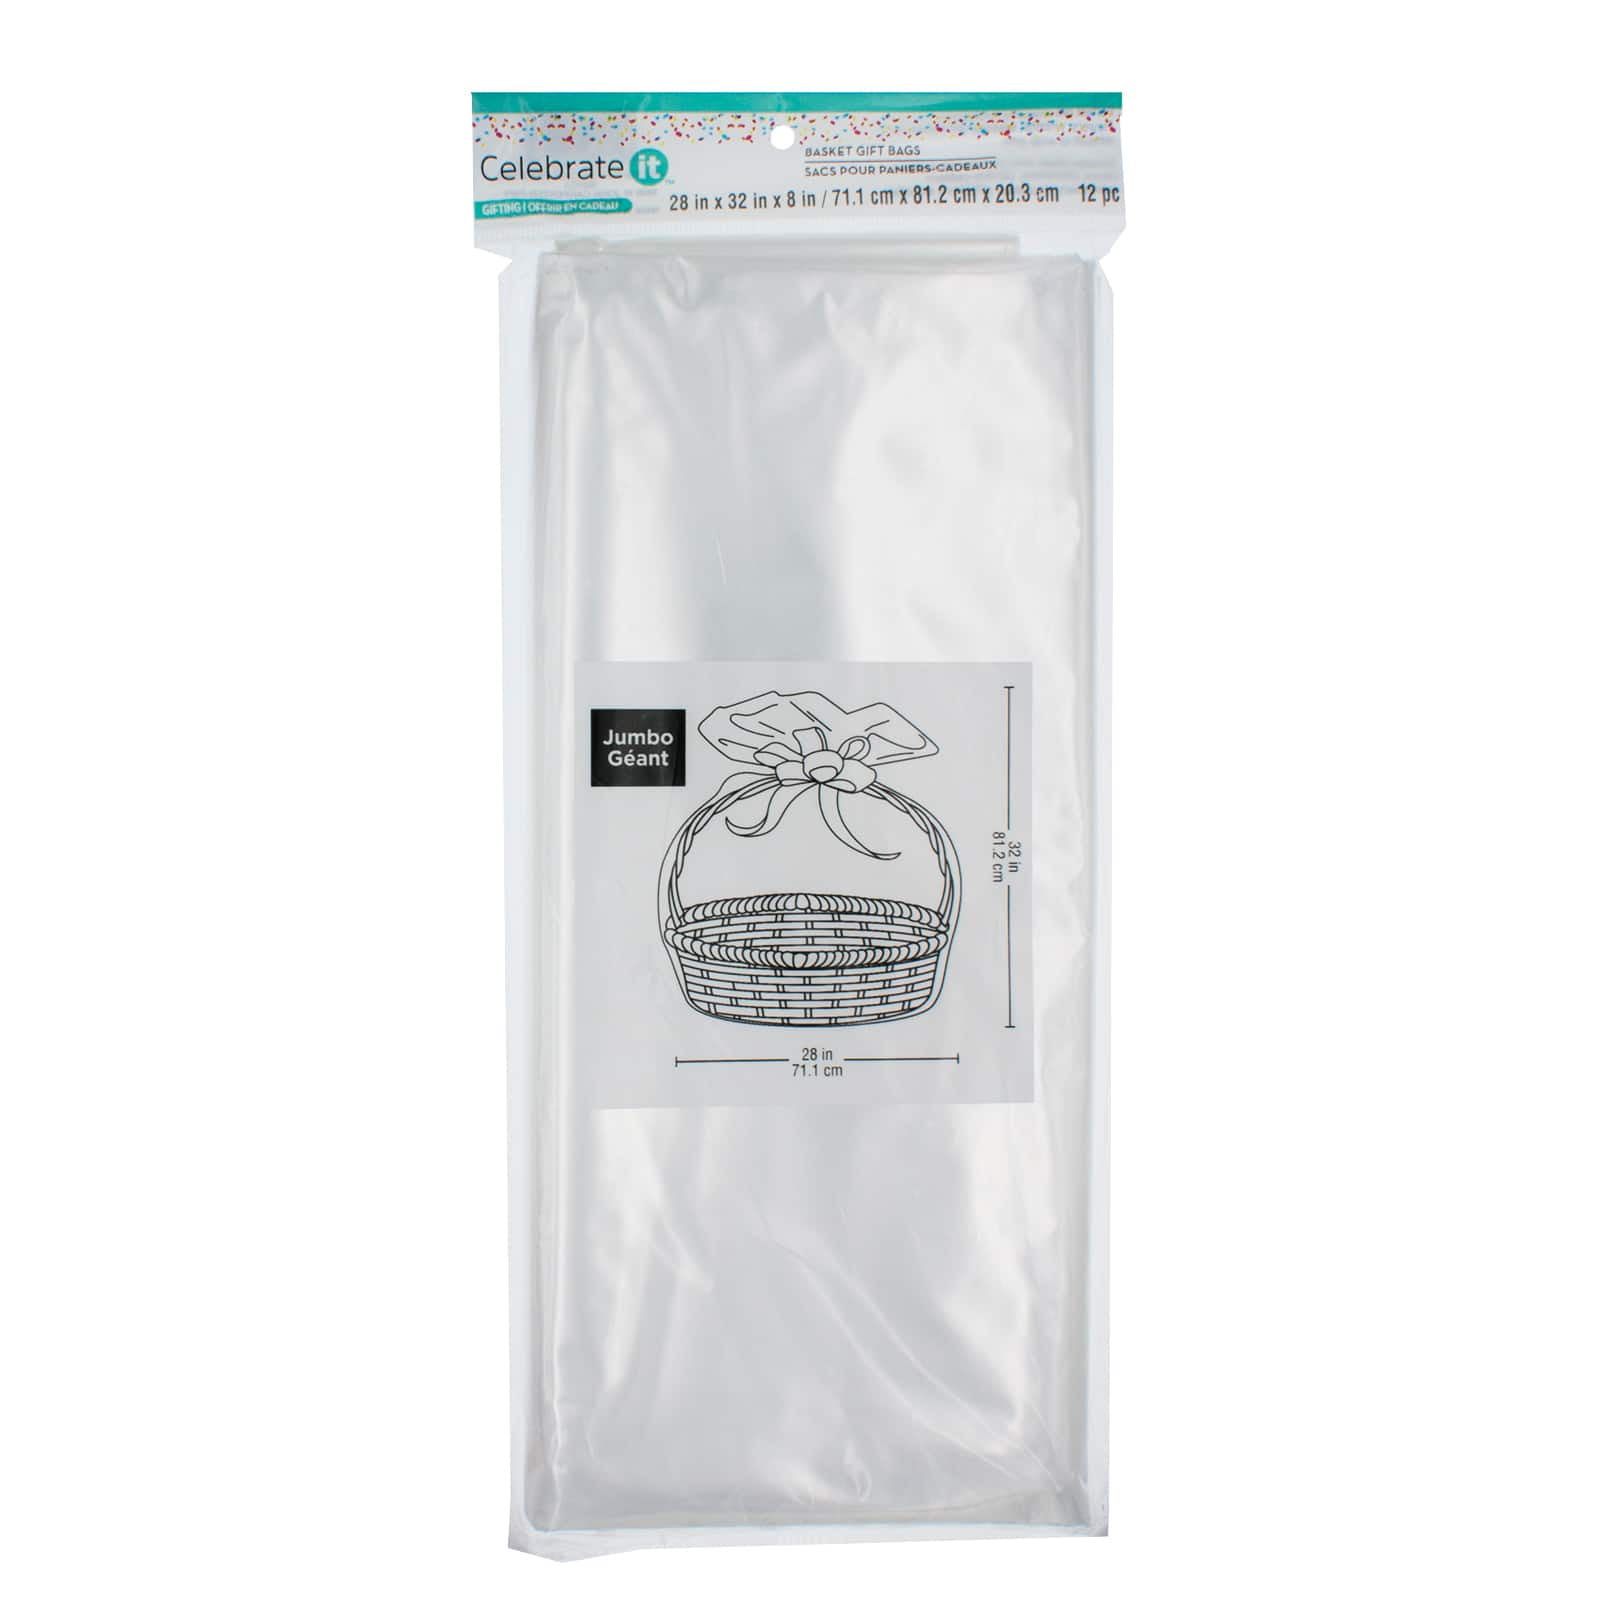 ywbag Clear Gift Bags with Handles, Reusable White Frosted Plastic Bags for Gifts Bags, Boutiques Bags, Parties Bags, Events Bags, Bulk 10 Pcs (9.8